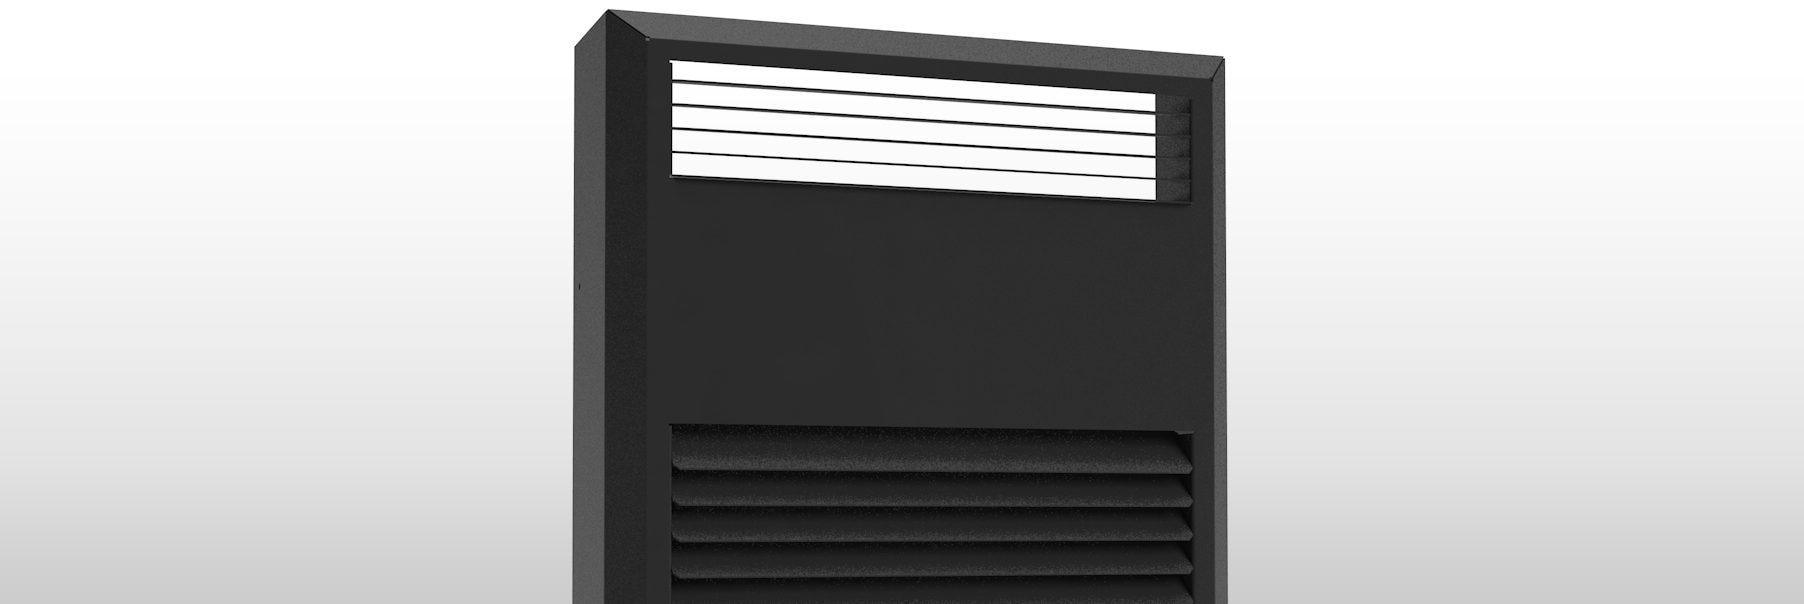 Extreme Exterior Grille Large e1613608128154